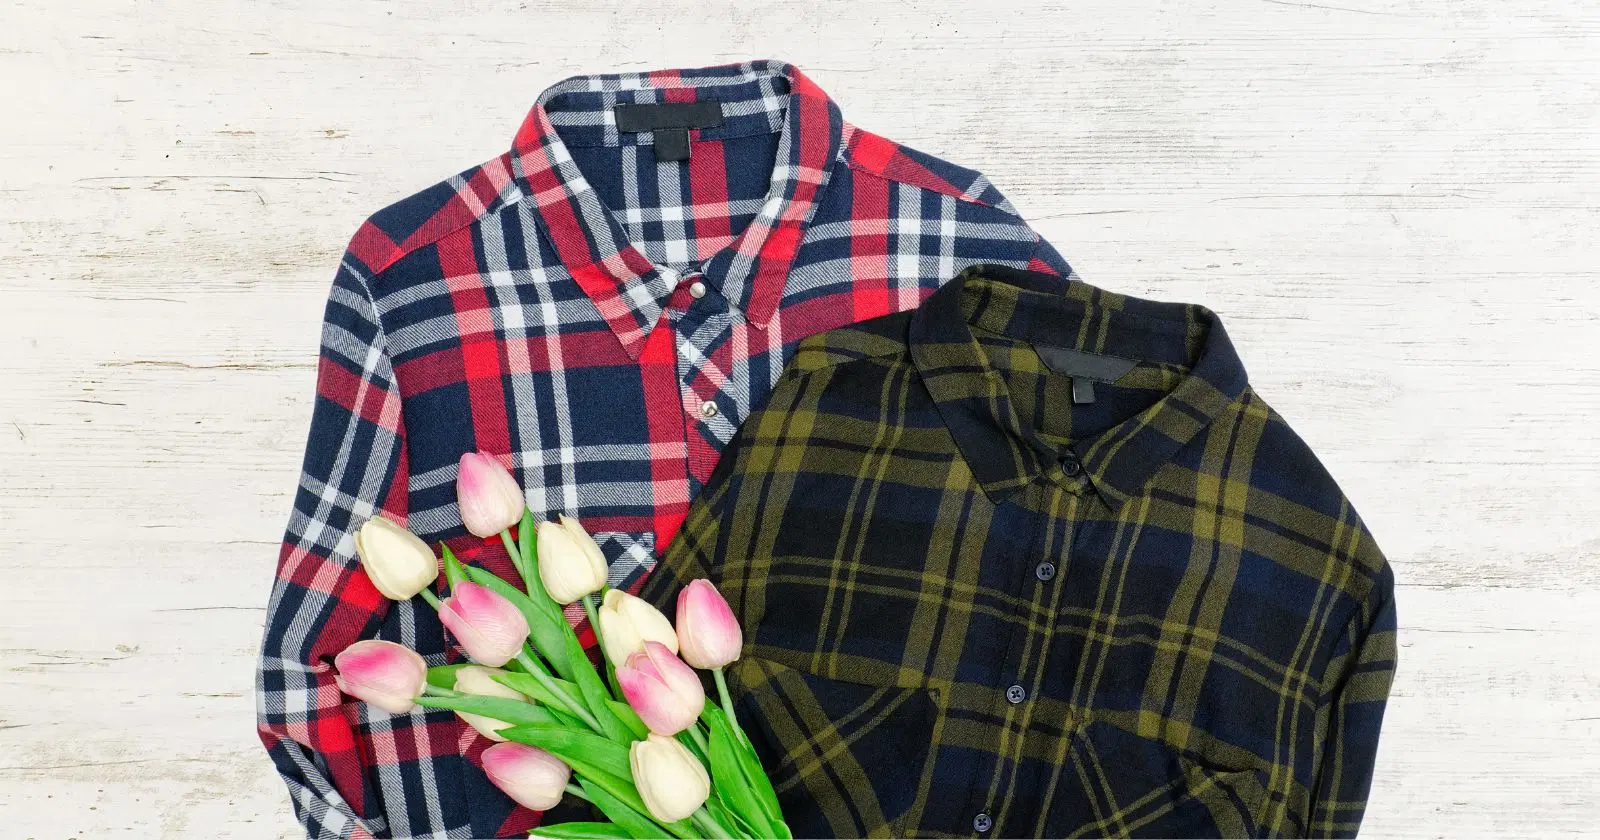 Flannel vs Plaid: Here’s The Difference